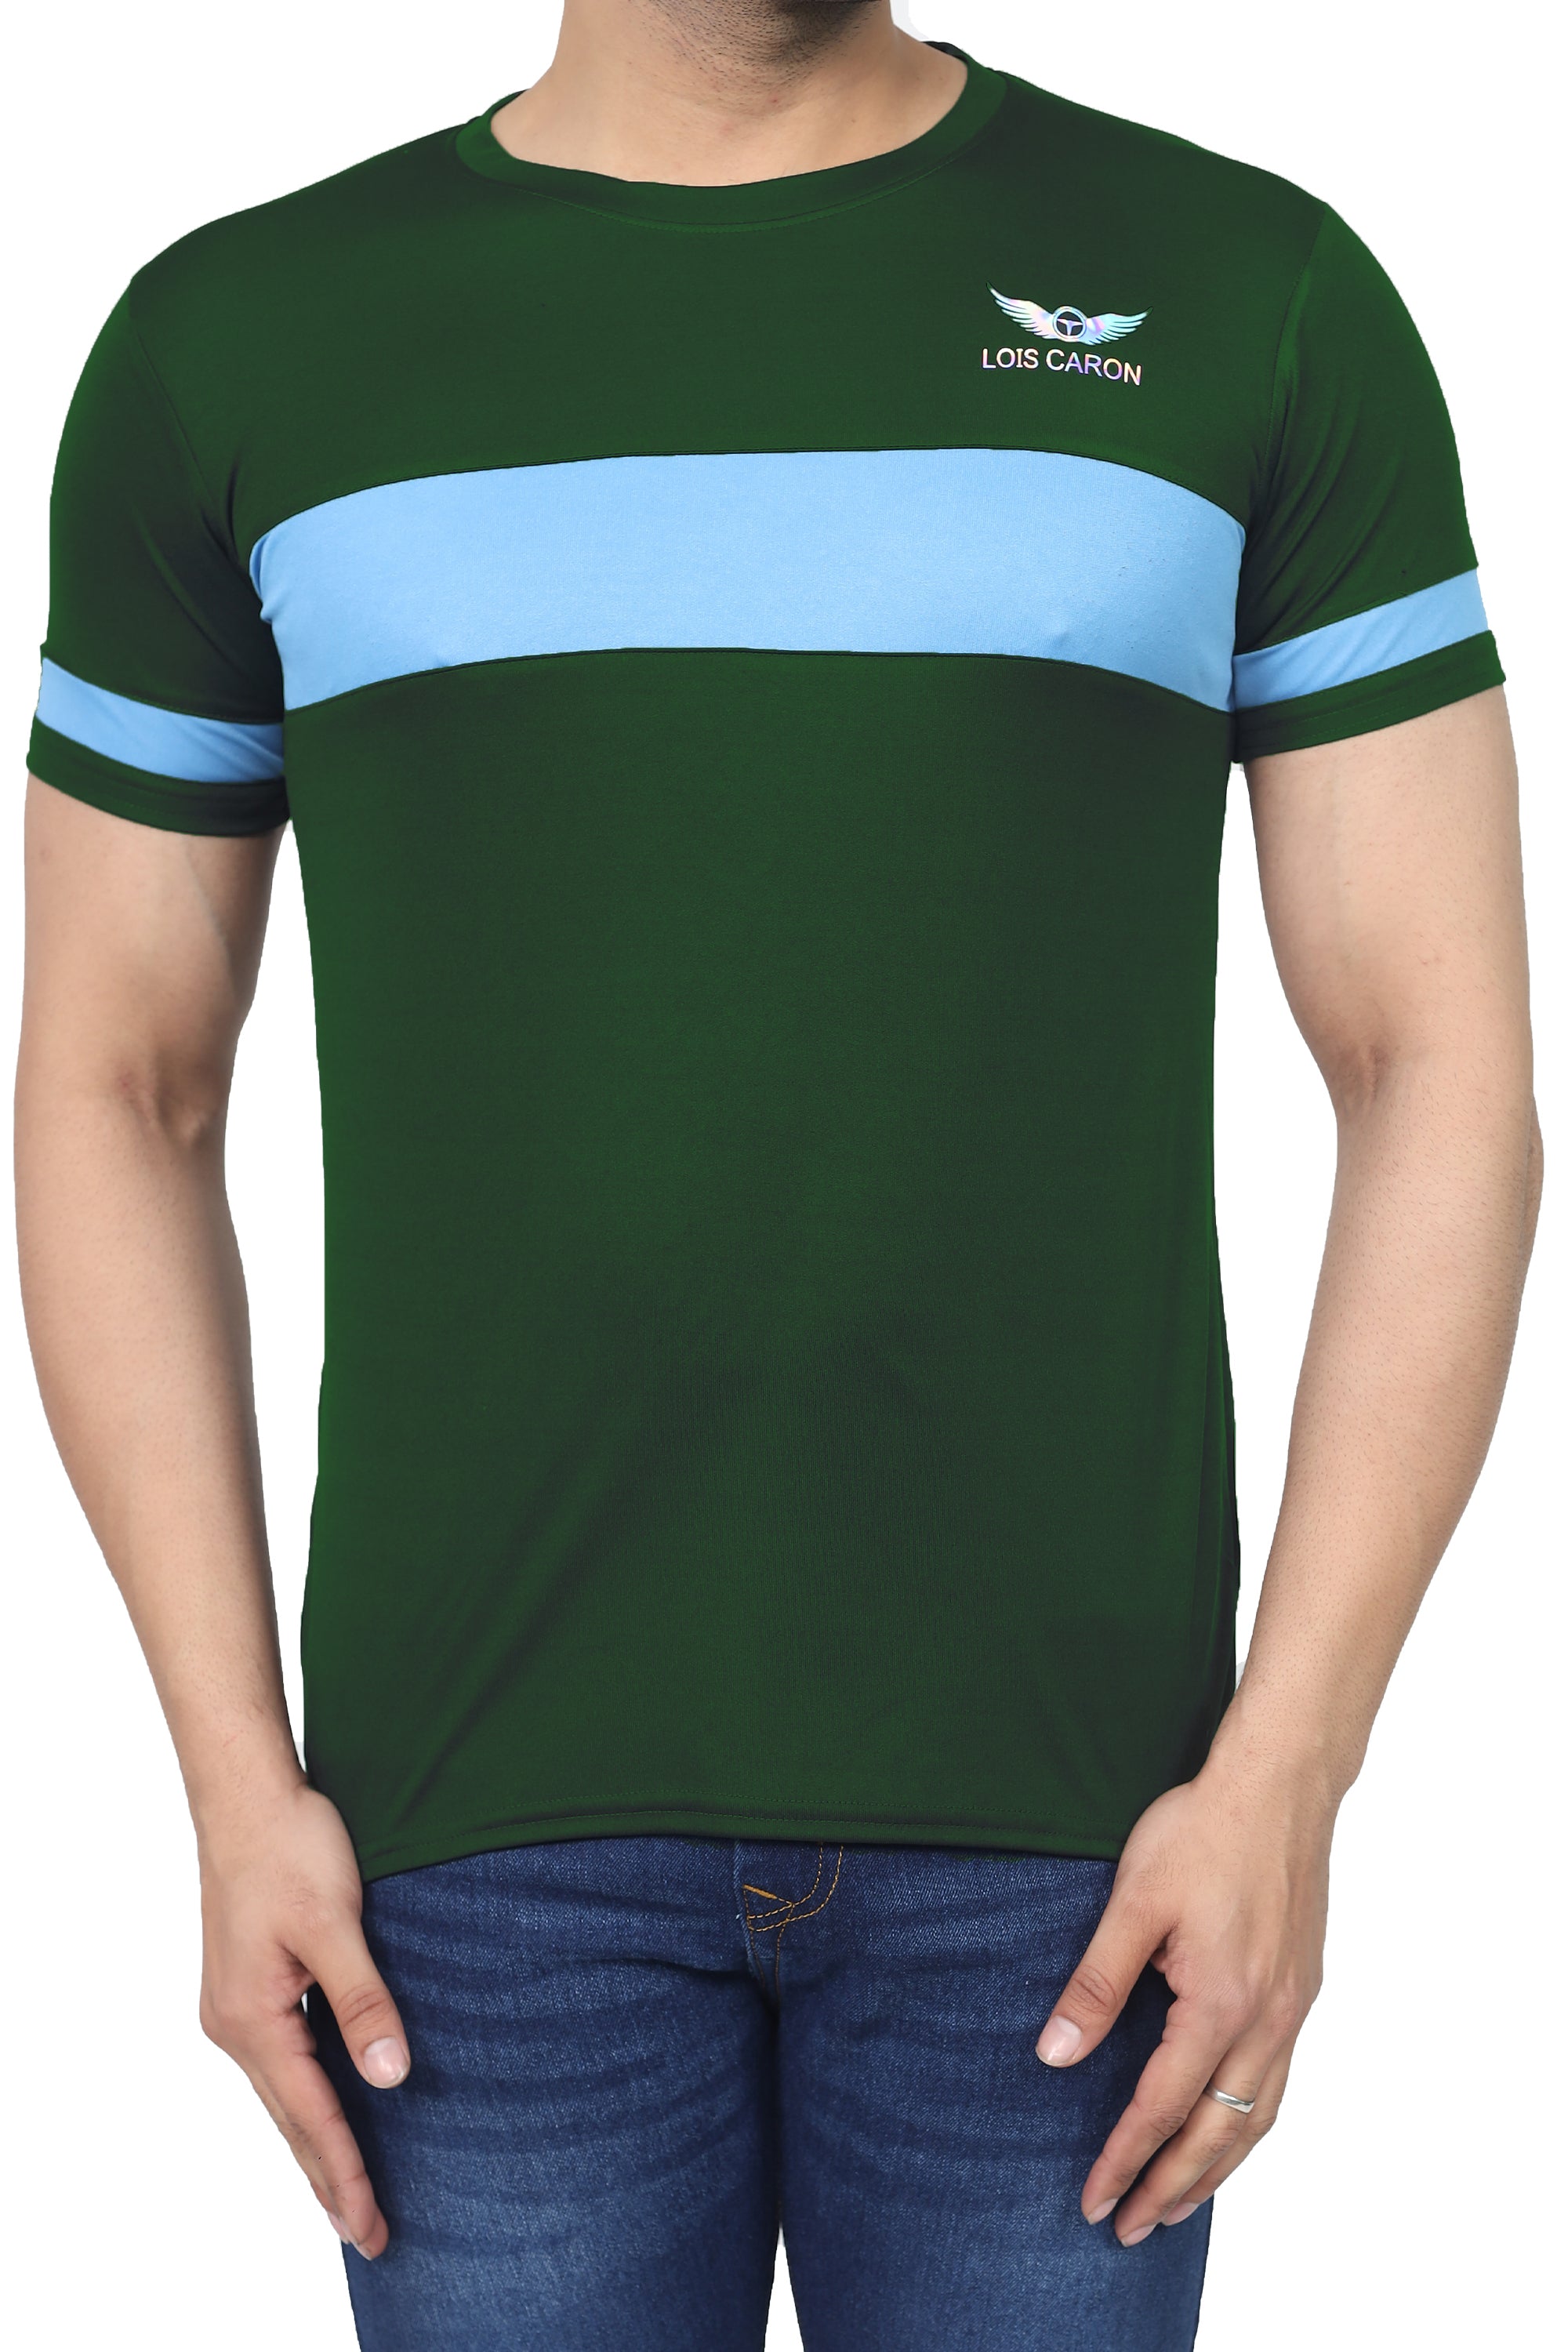 LOIS CARON  LCTM-10L Dark Green With Blue Vertical Dry Fit Men Color Block, Sporty, Washed/Ombre Round Neck Polyester Dark Green, Blue T-Shirt